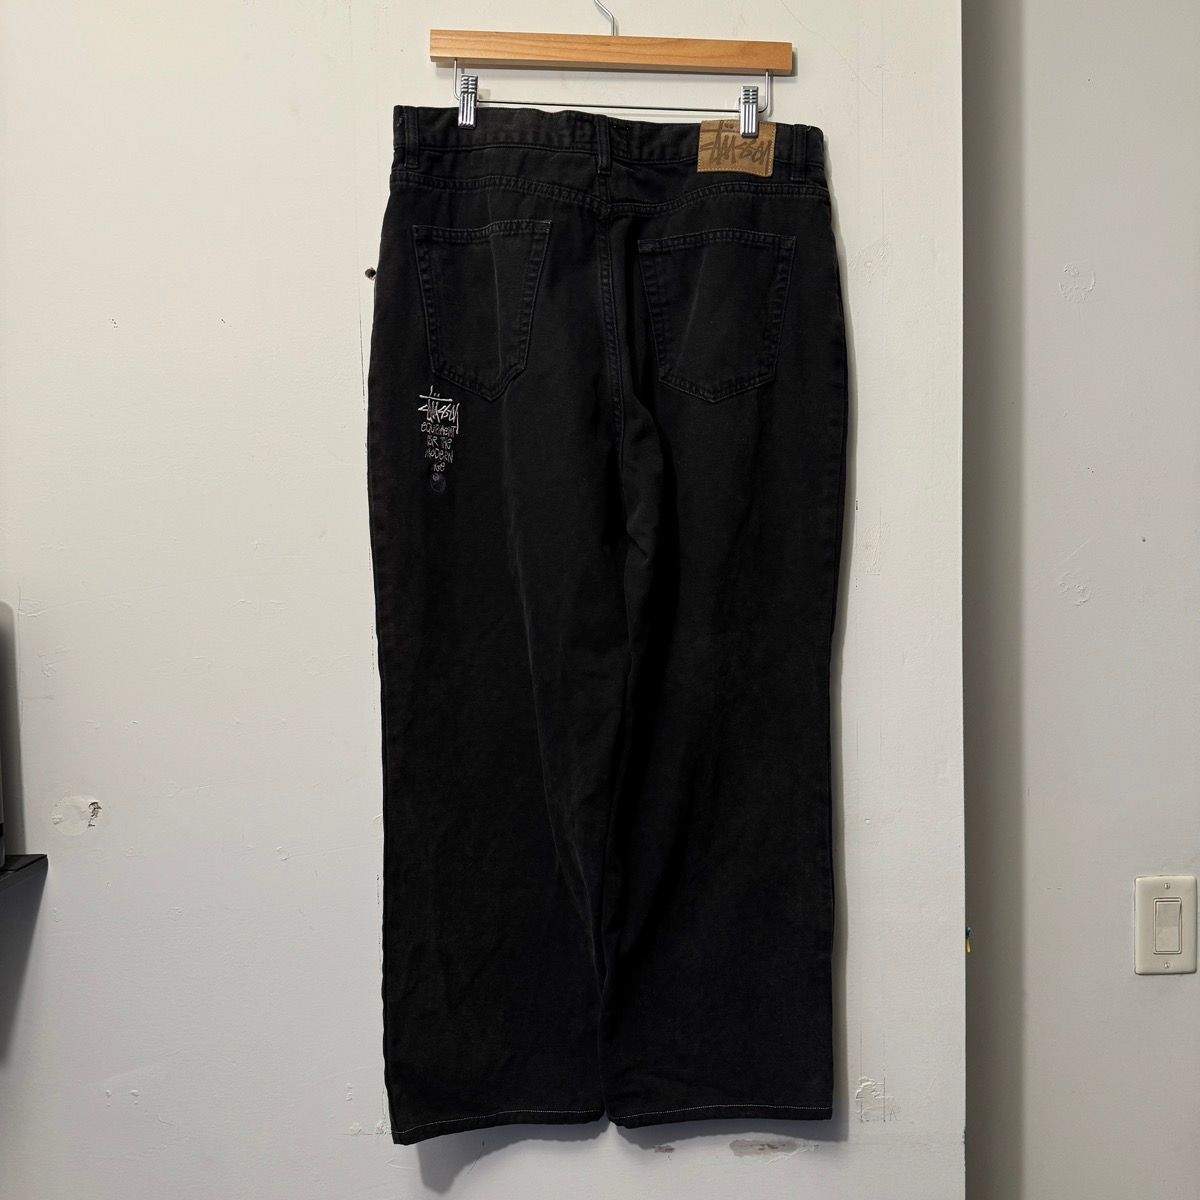 Pre-owned Stussy Washed Canvas Black 8 Ball Big Ol' Jeans 33x27.5